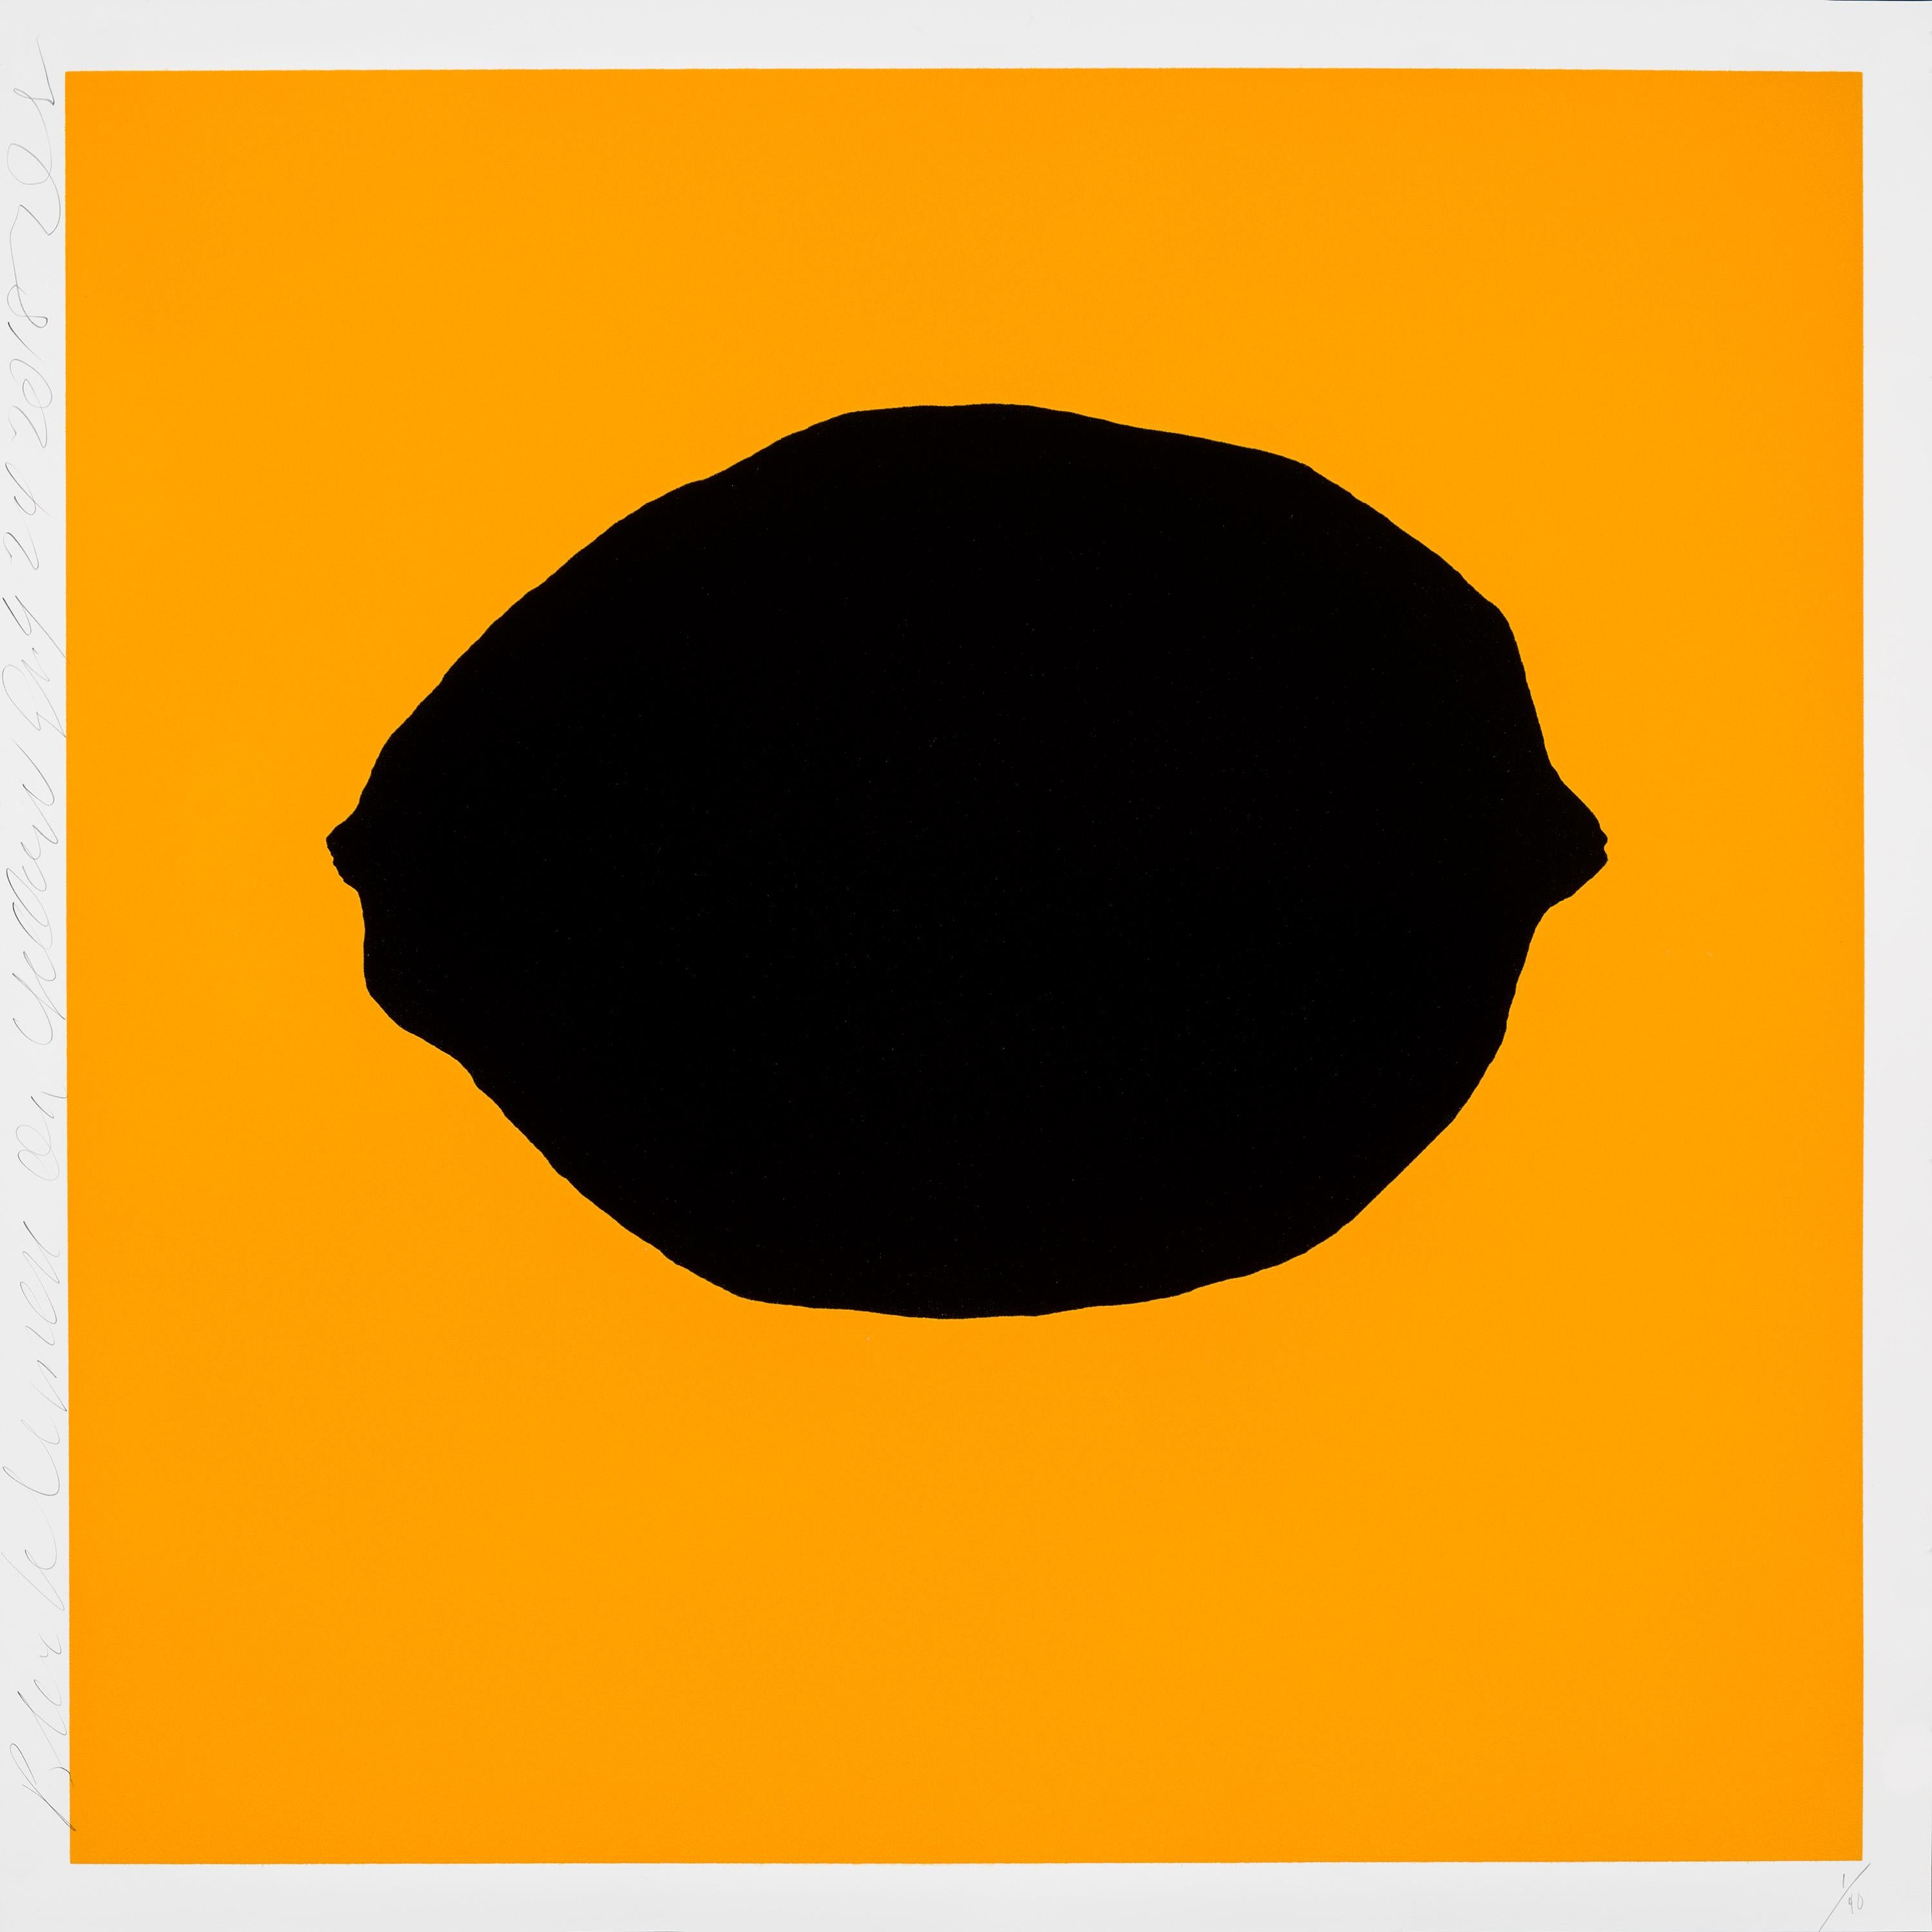 Black Lemon on Yellow, 2018, Color silkscreen with enamel ink - Print by Donald Sultan